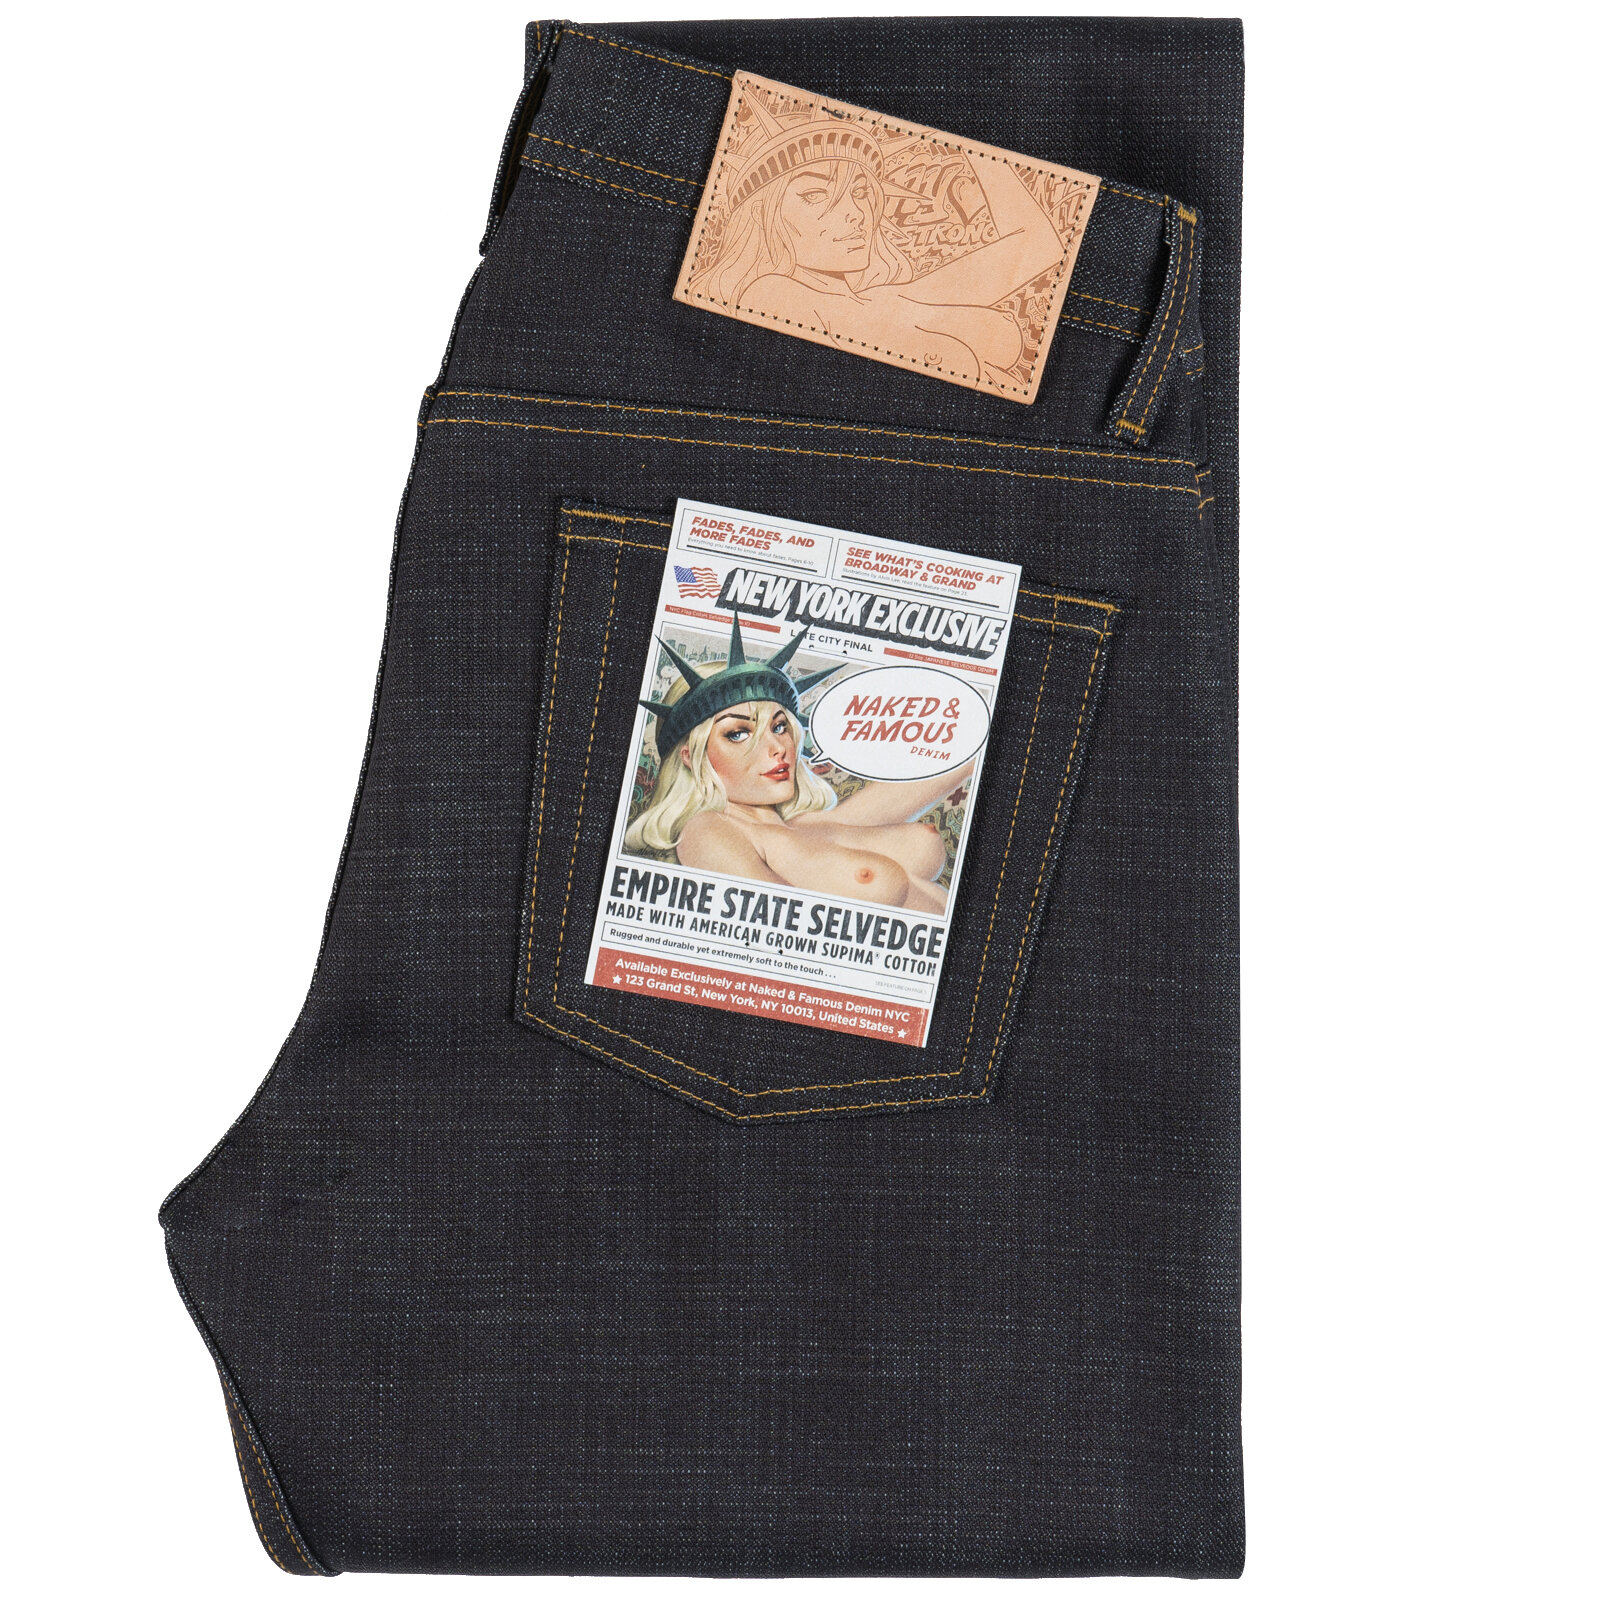  Empire State Selvedge jeans - folded 